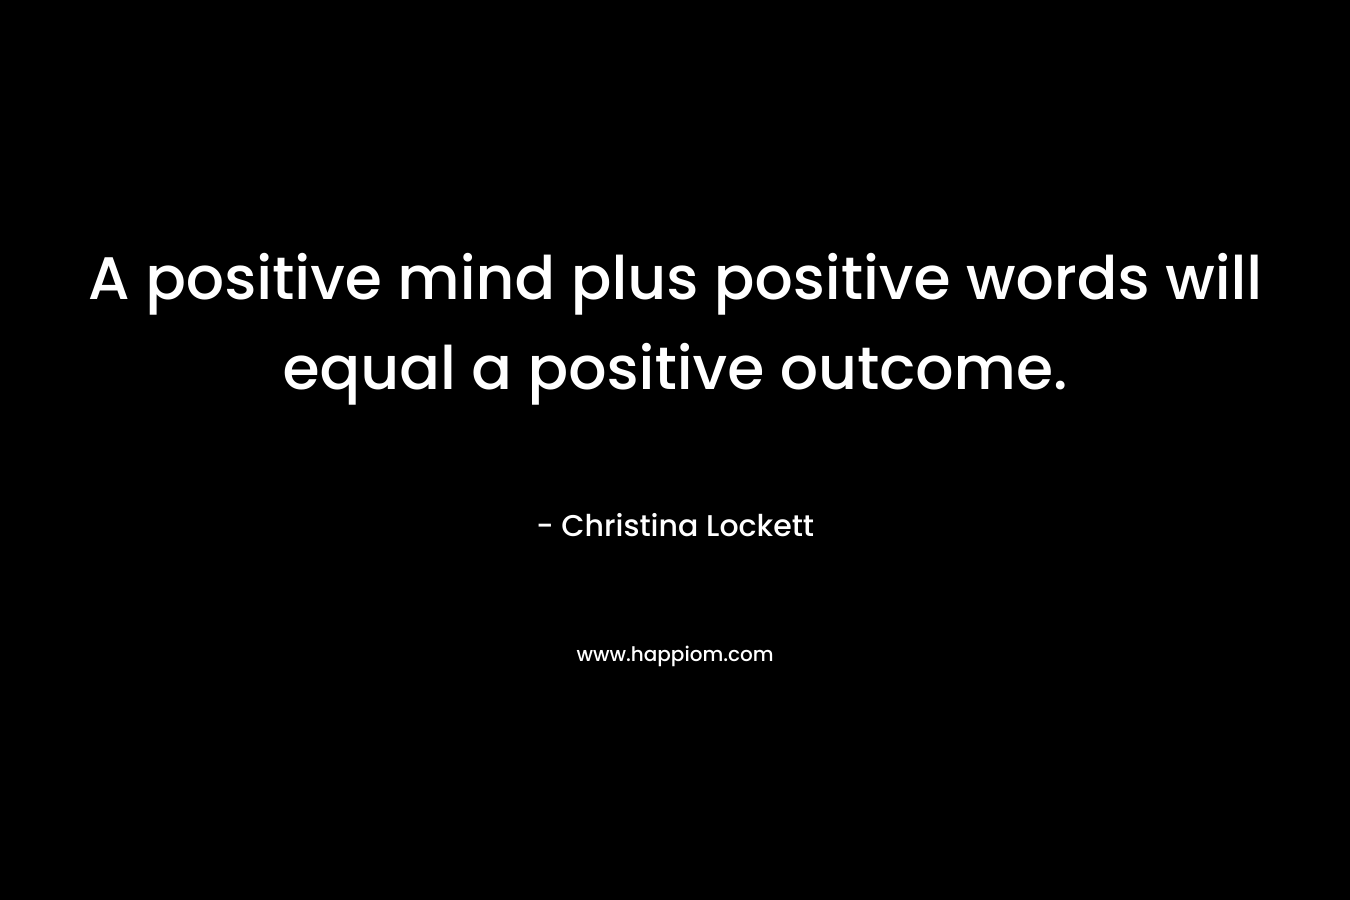 A positive mind plus positive words will equal a positive outcome.